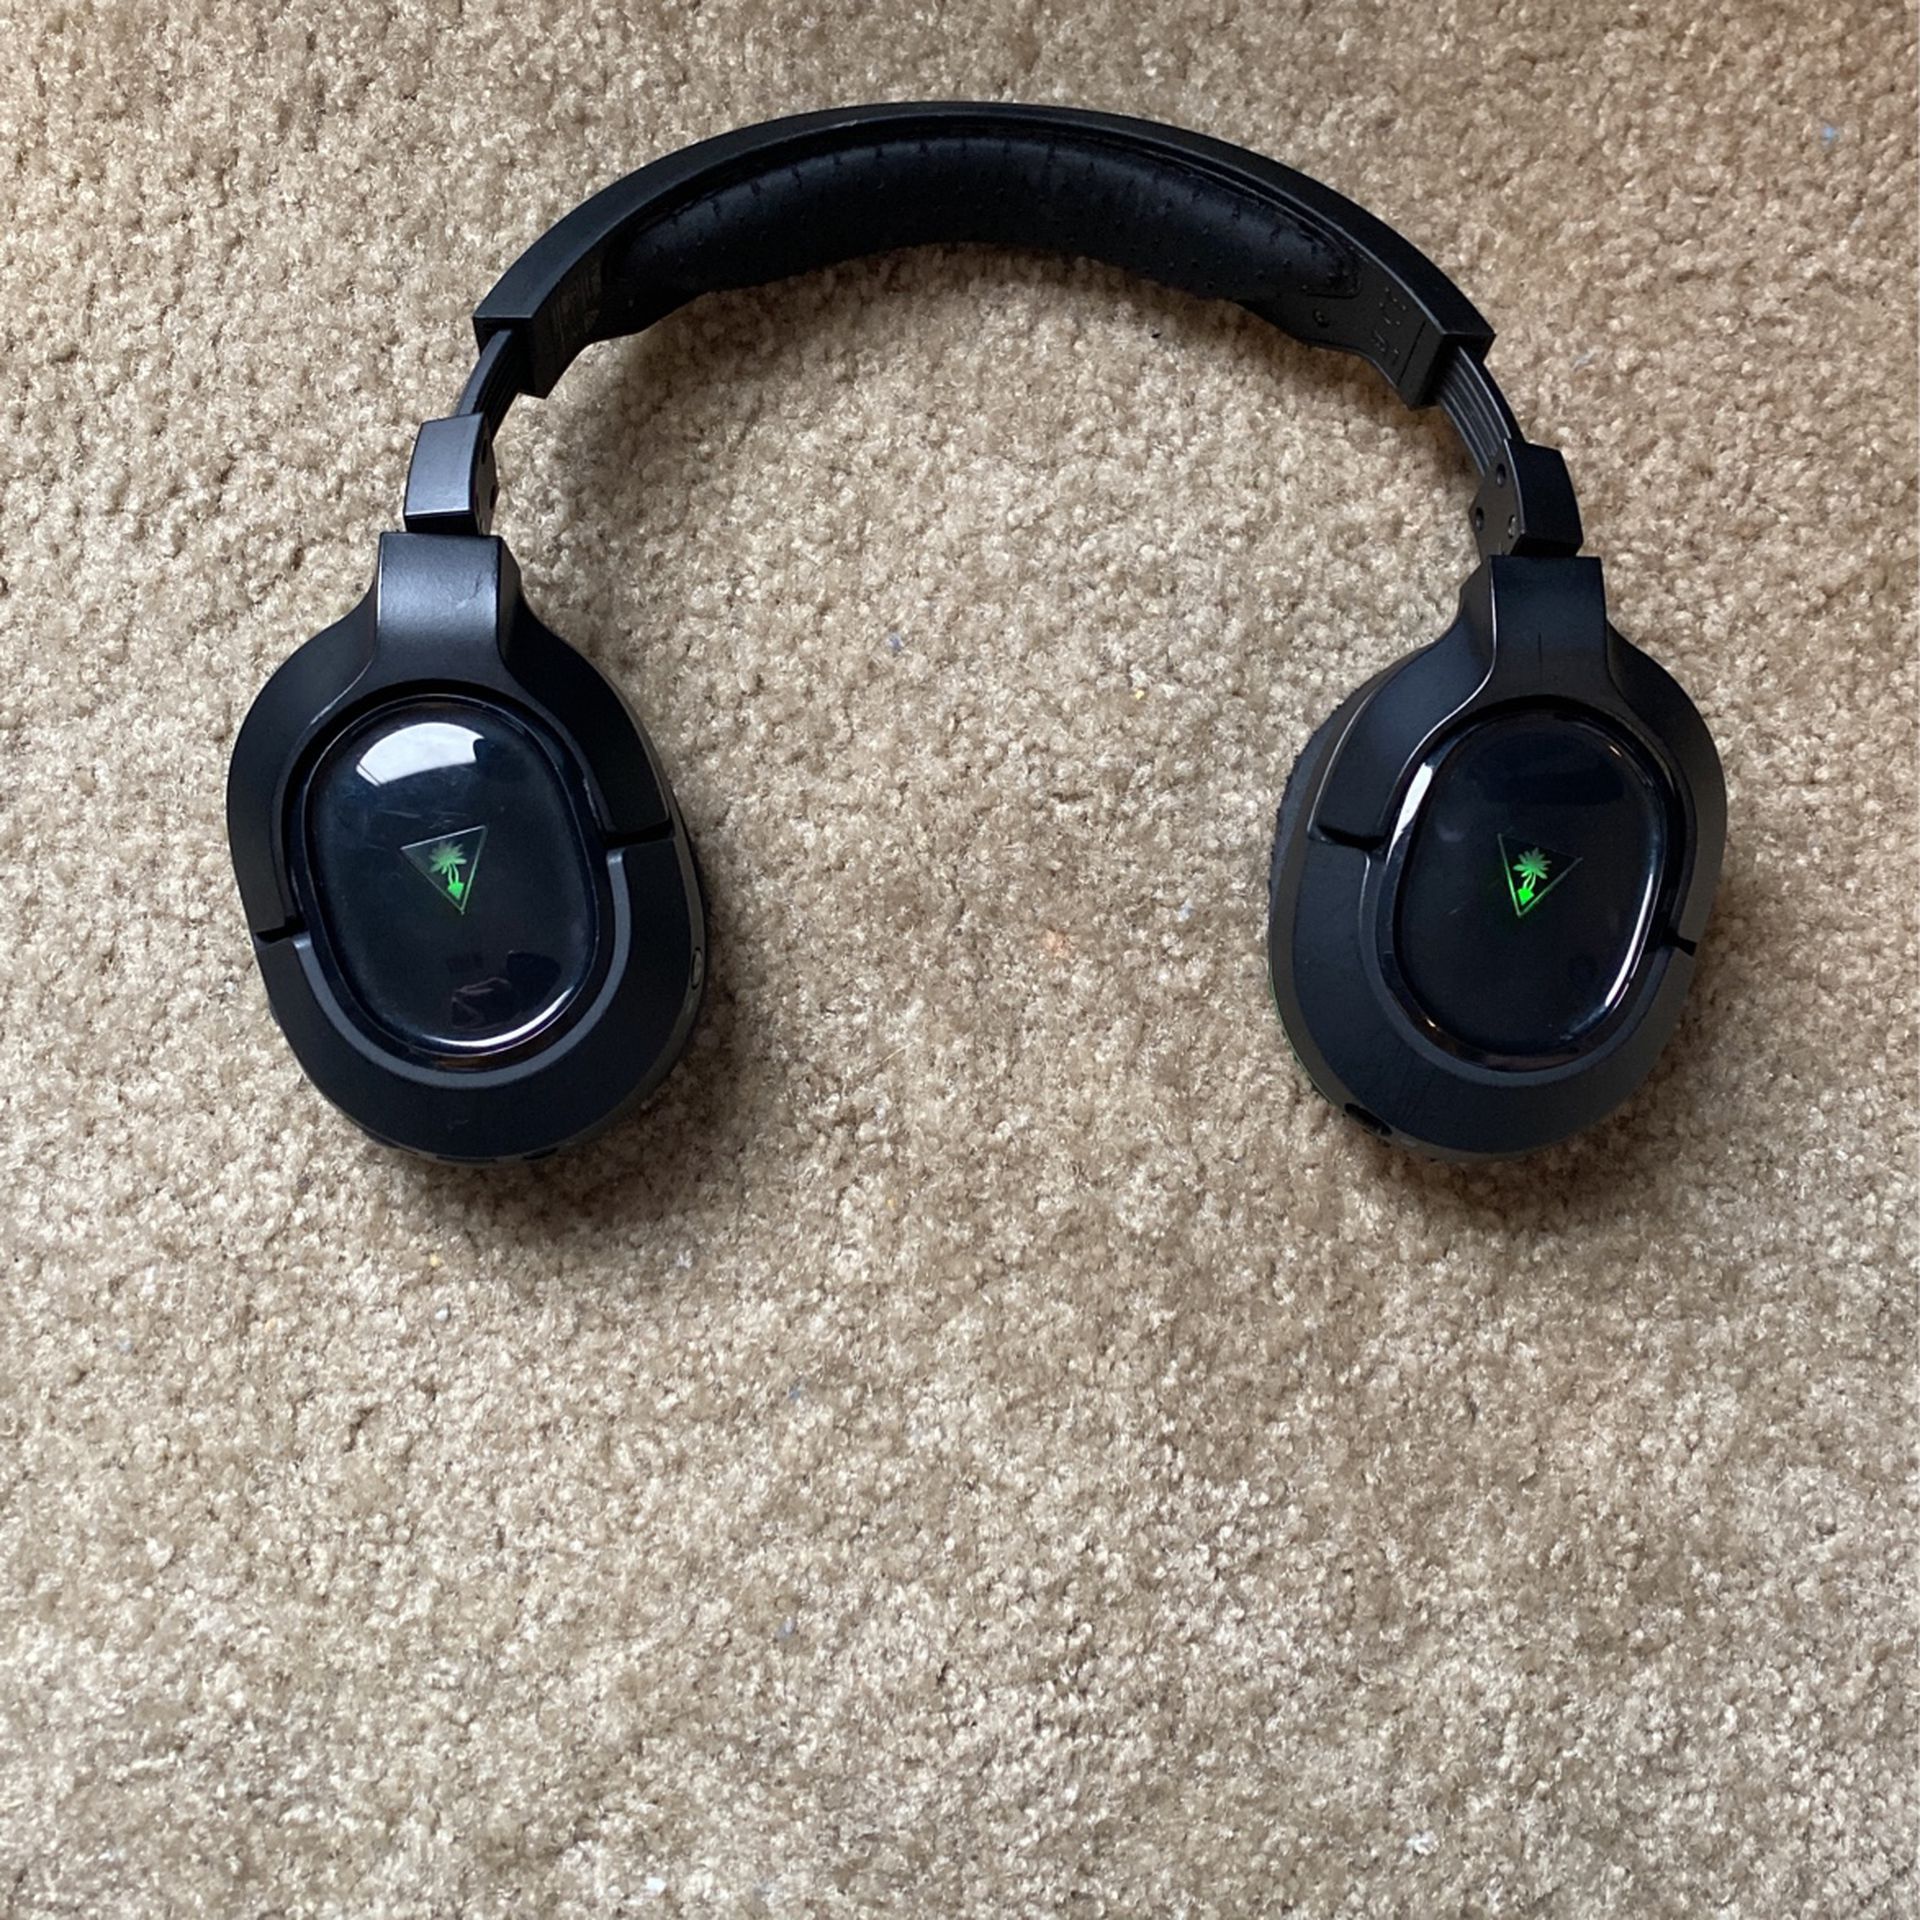 (Price is negotiable )Turtle beach Stealth 420x wireless gaming headset for xbox one 